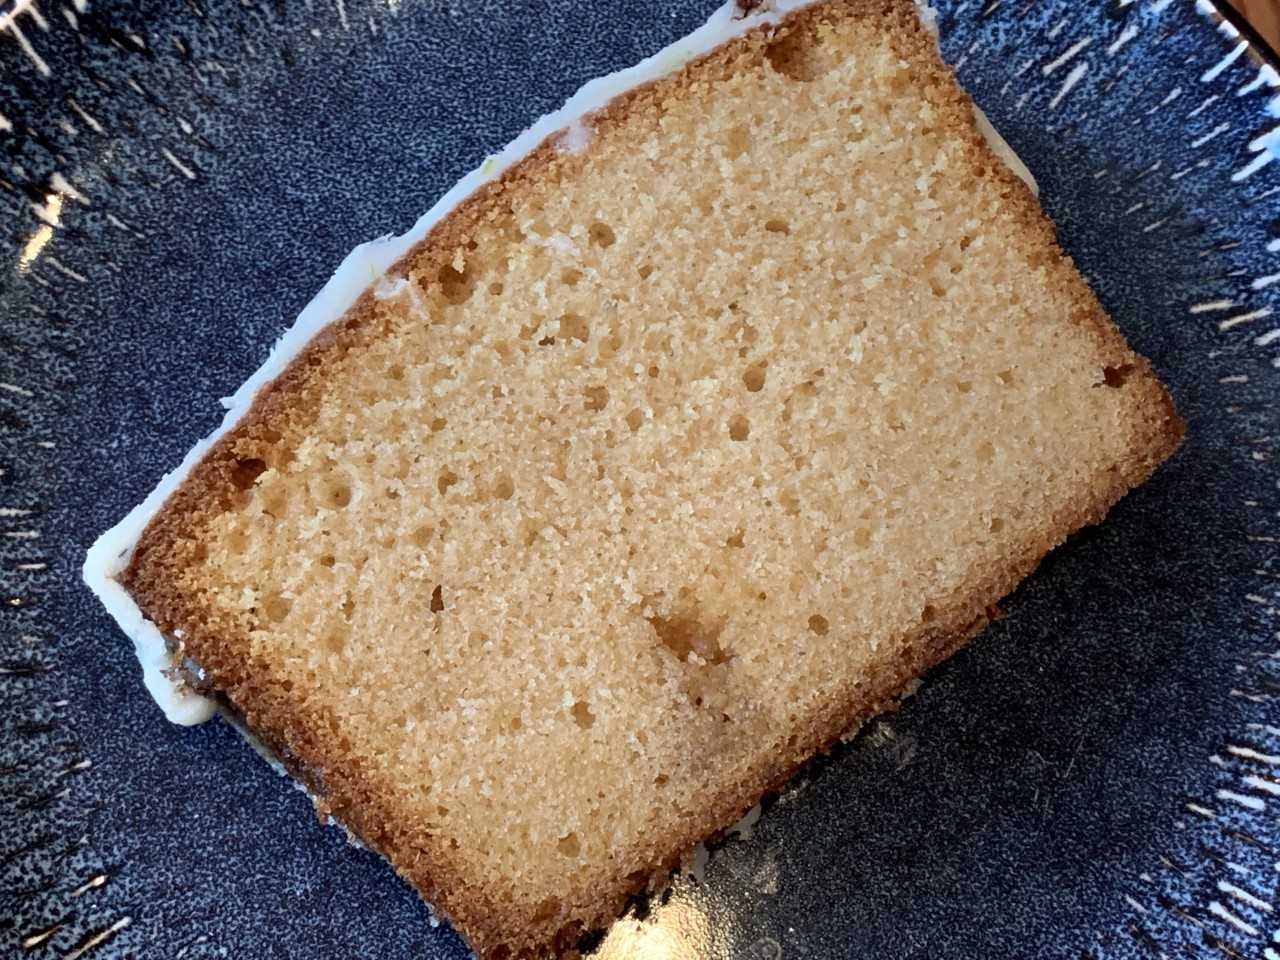 mr-rum-and-coke-pound-cake-with-lime-glaze Image